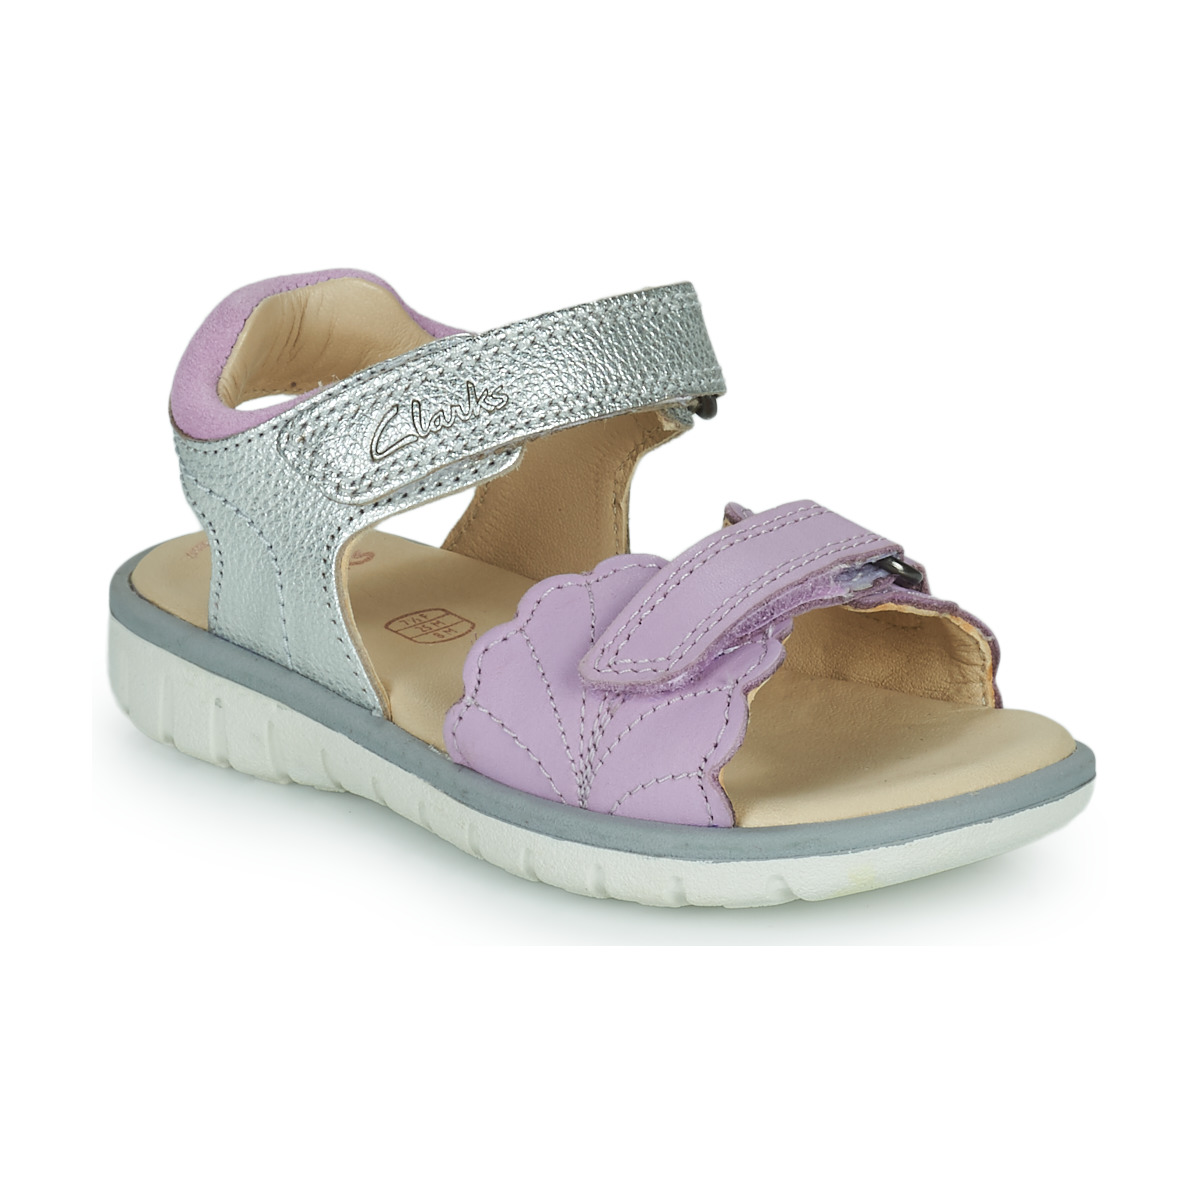 Chaussures Fille Fruit Of The Loo ROAM WING K. Argent / Violet